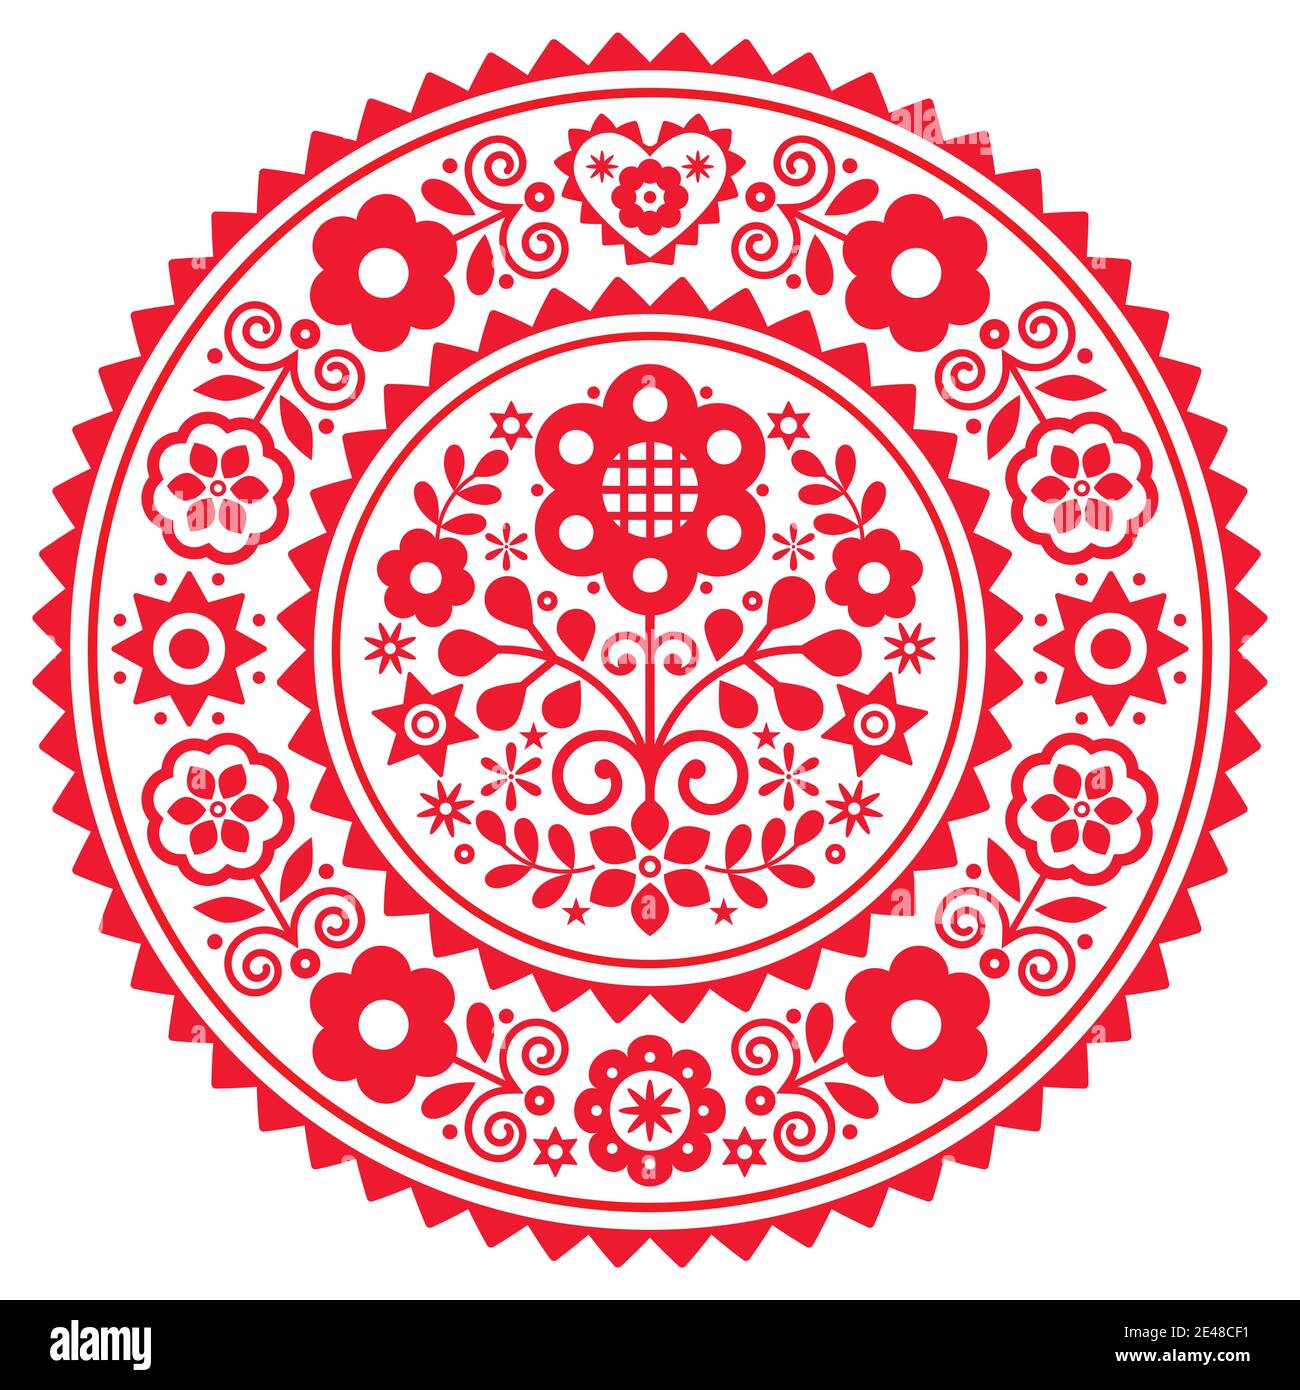 Folk art vector mandala design with flowers with frame inspired by old traditional Polish embroidery Lachy Sadeckie - bohemian pattern Stock Vector